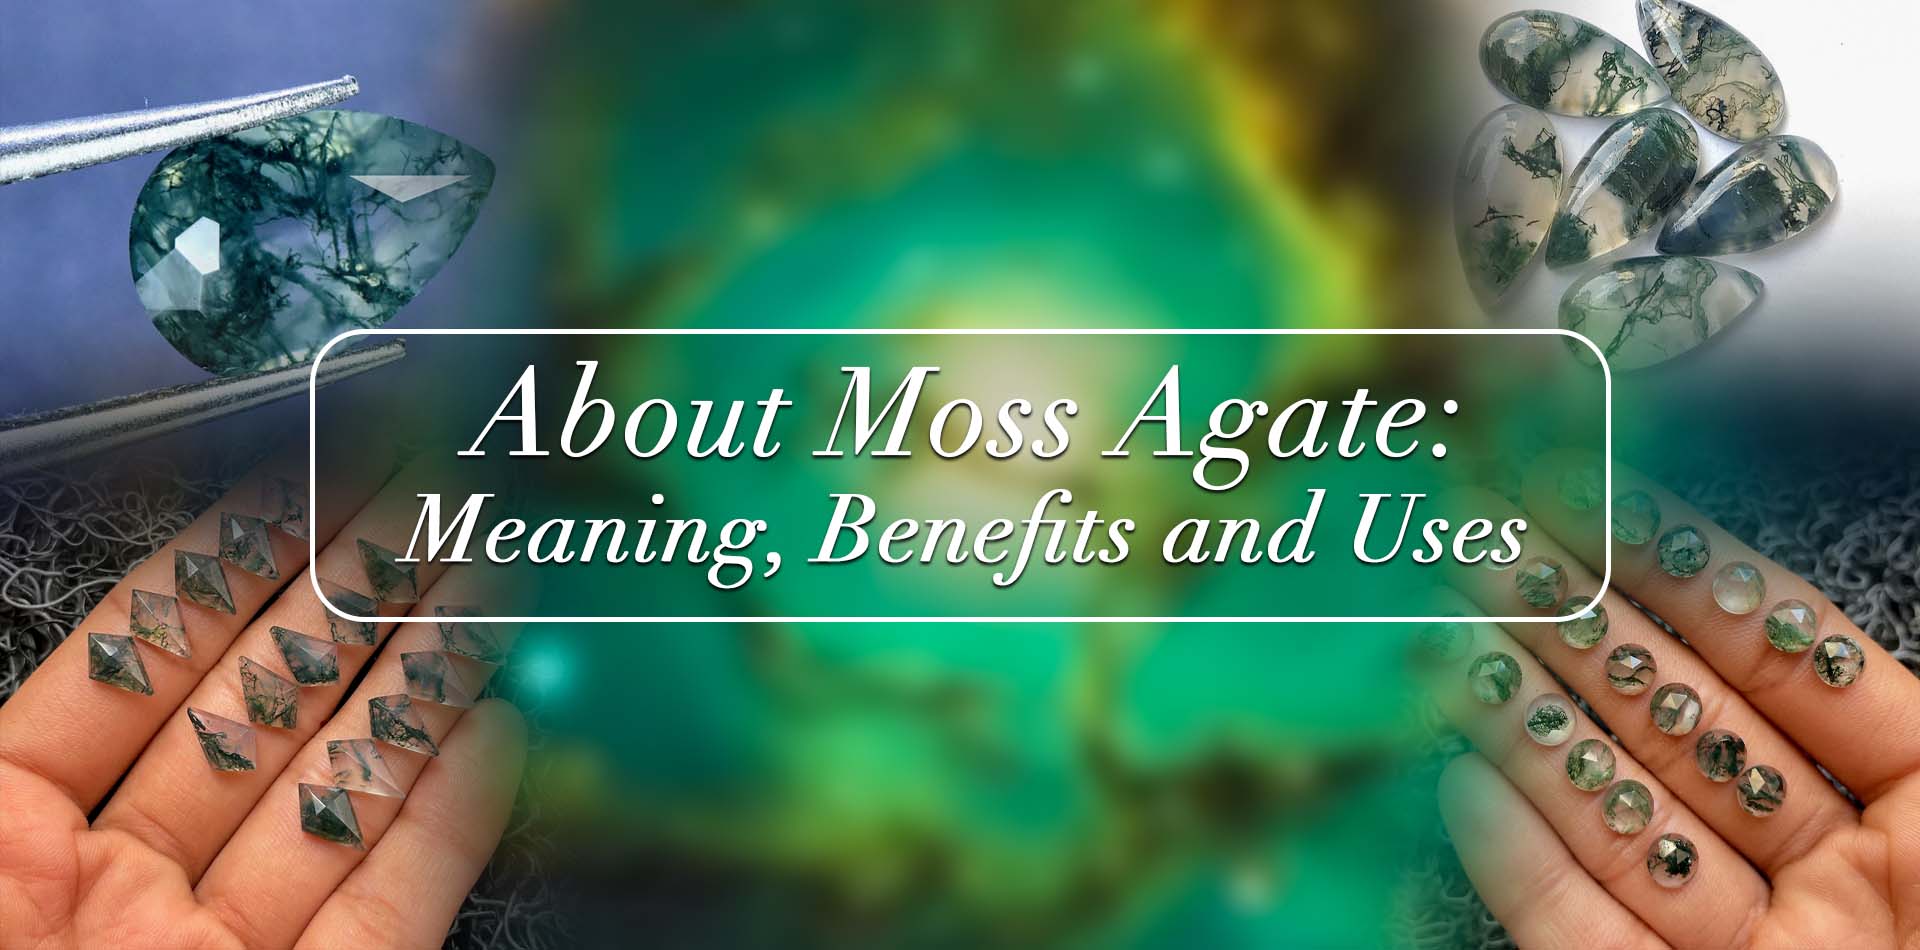 About Moss Agate: Meaning, Benefits, And Uses